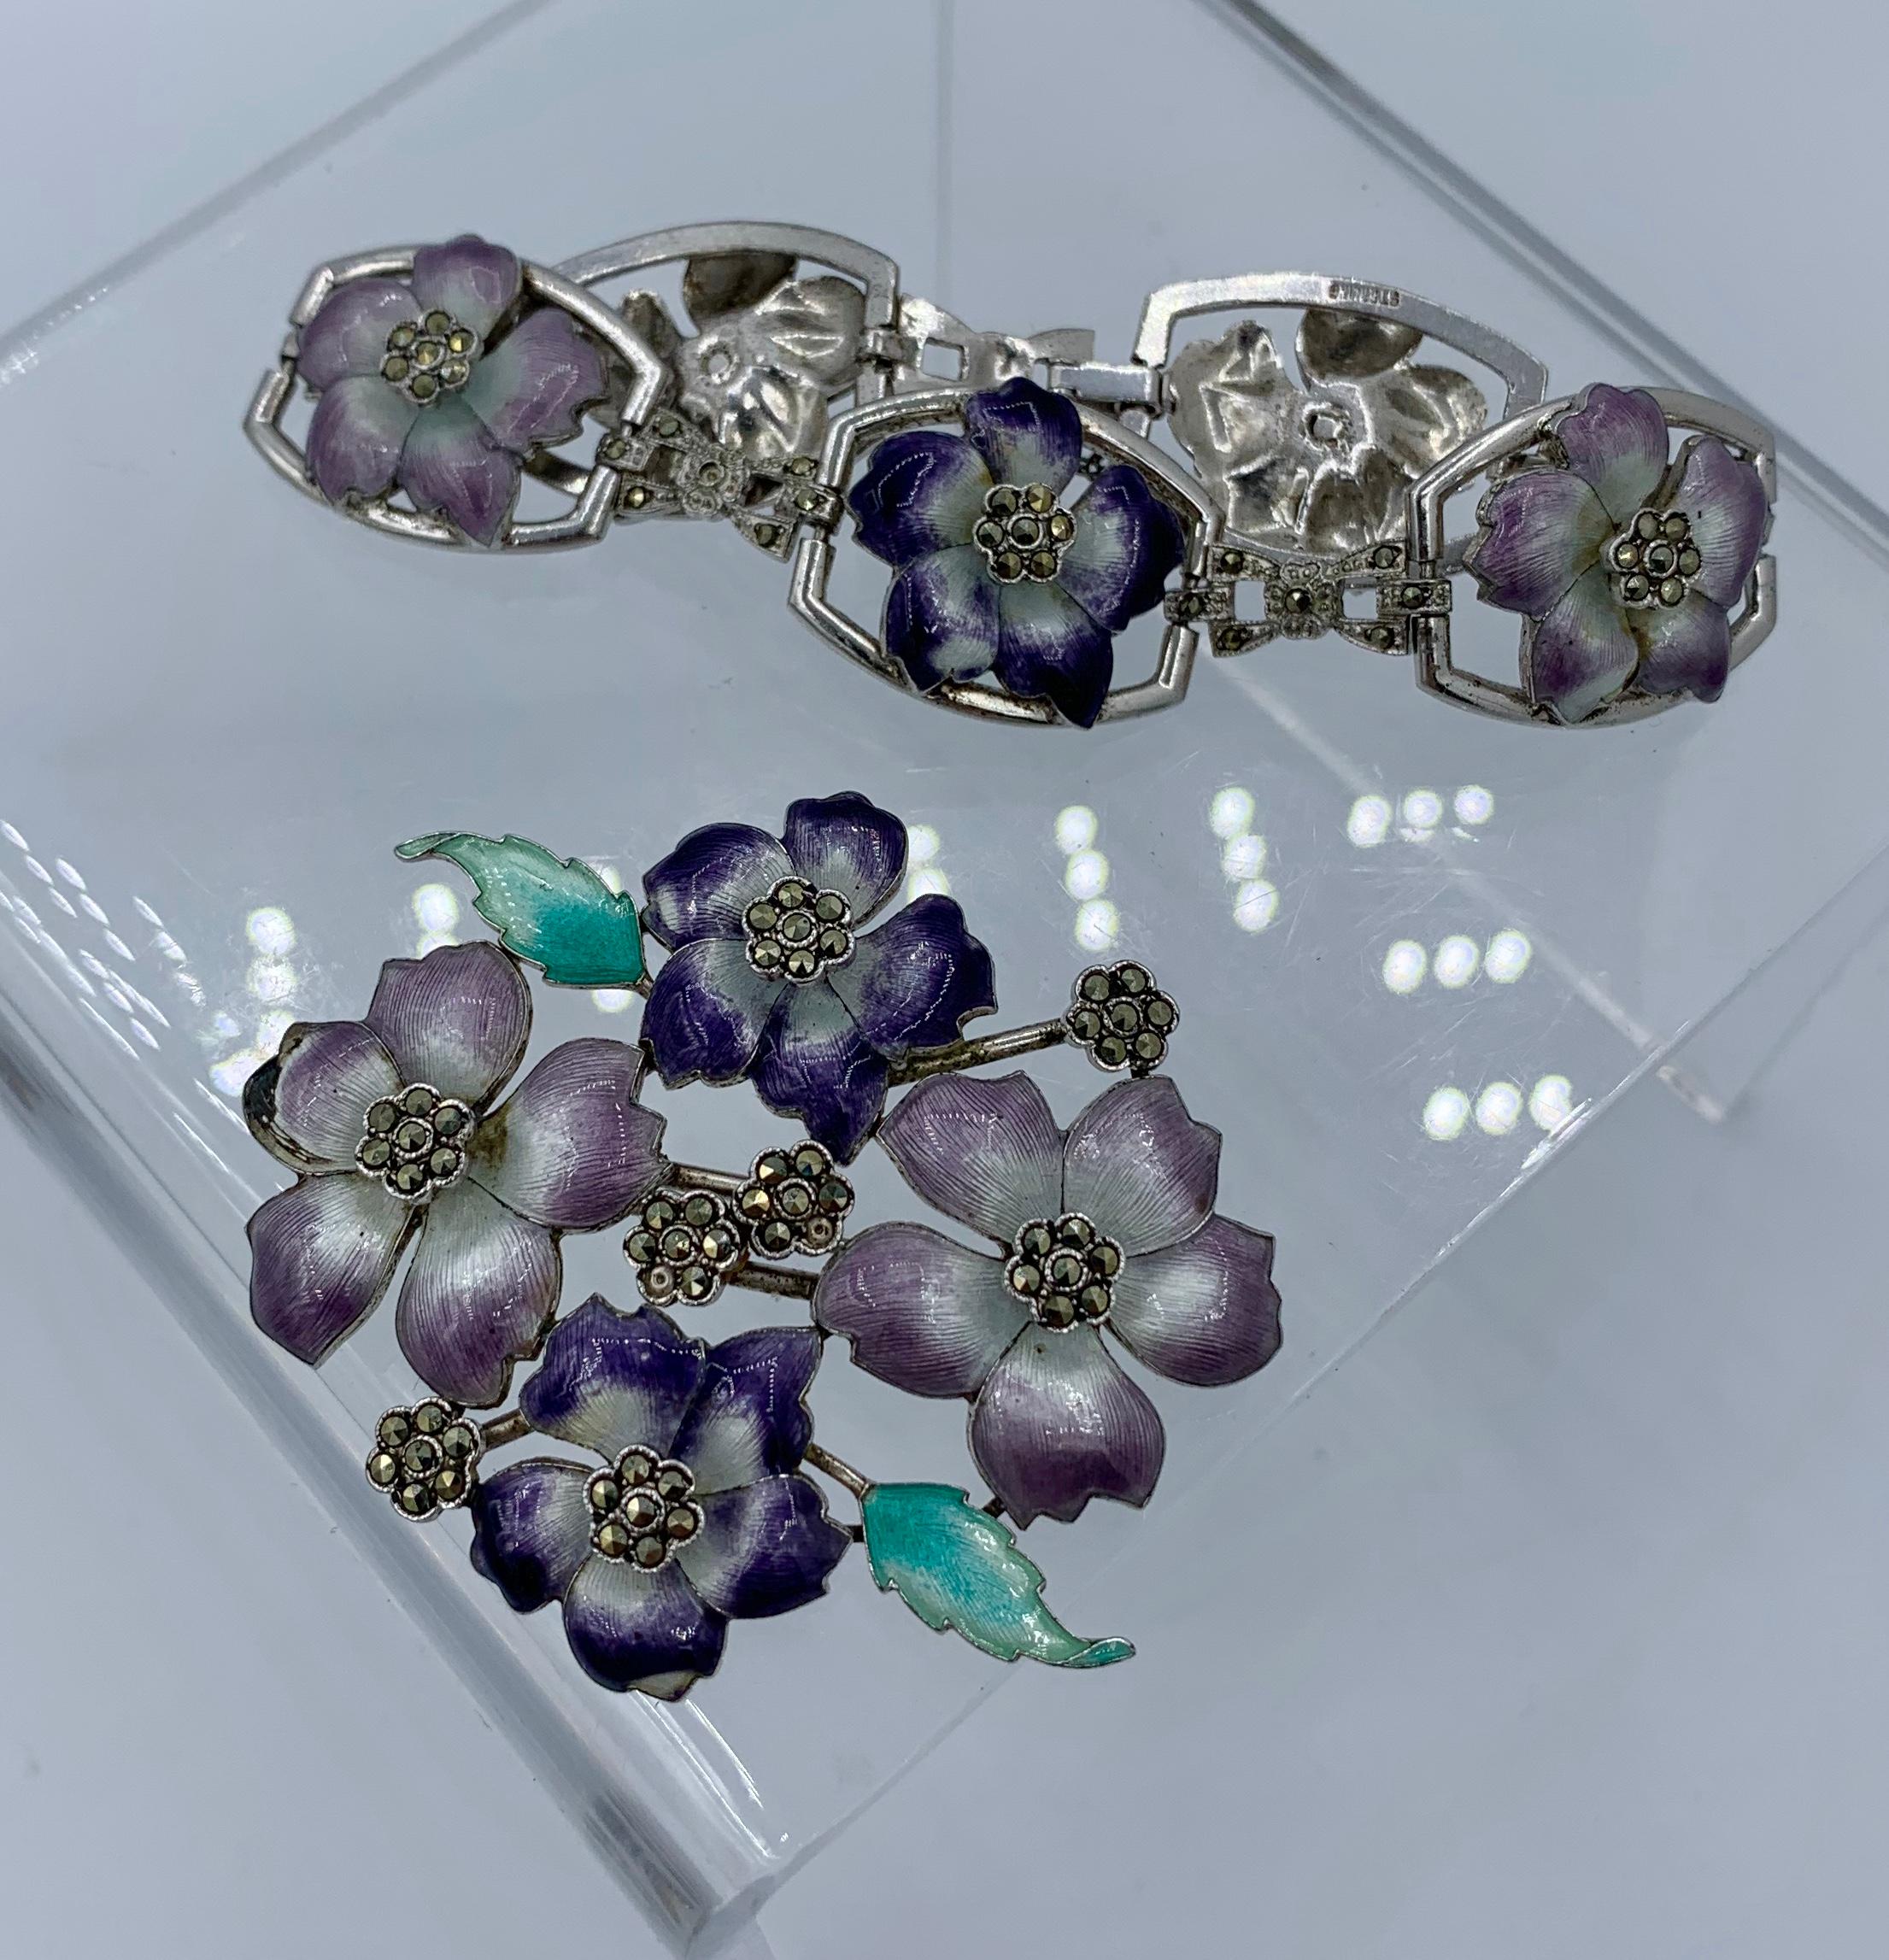 This is a very rare Art Nouveau - Art Deco violet pansy flower parure with a matching bracelet and brooch with exquisite flowers decorated with varied hues of purple enamel, with green leaves and marcasite set centers in Sterling Silver.  The